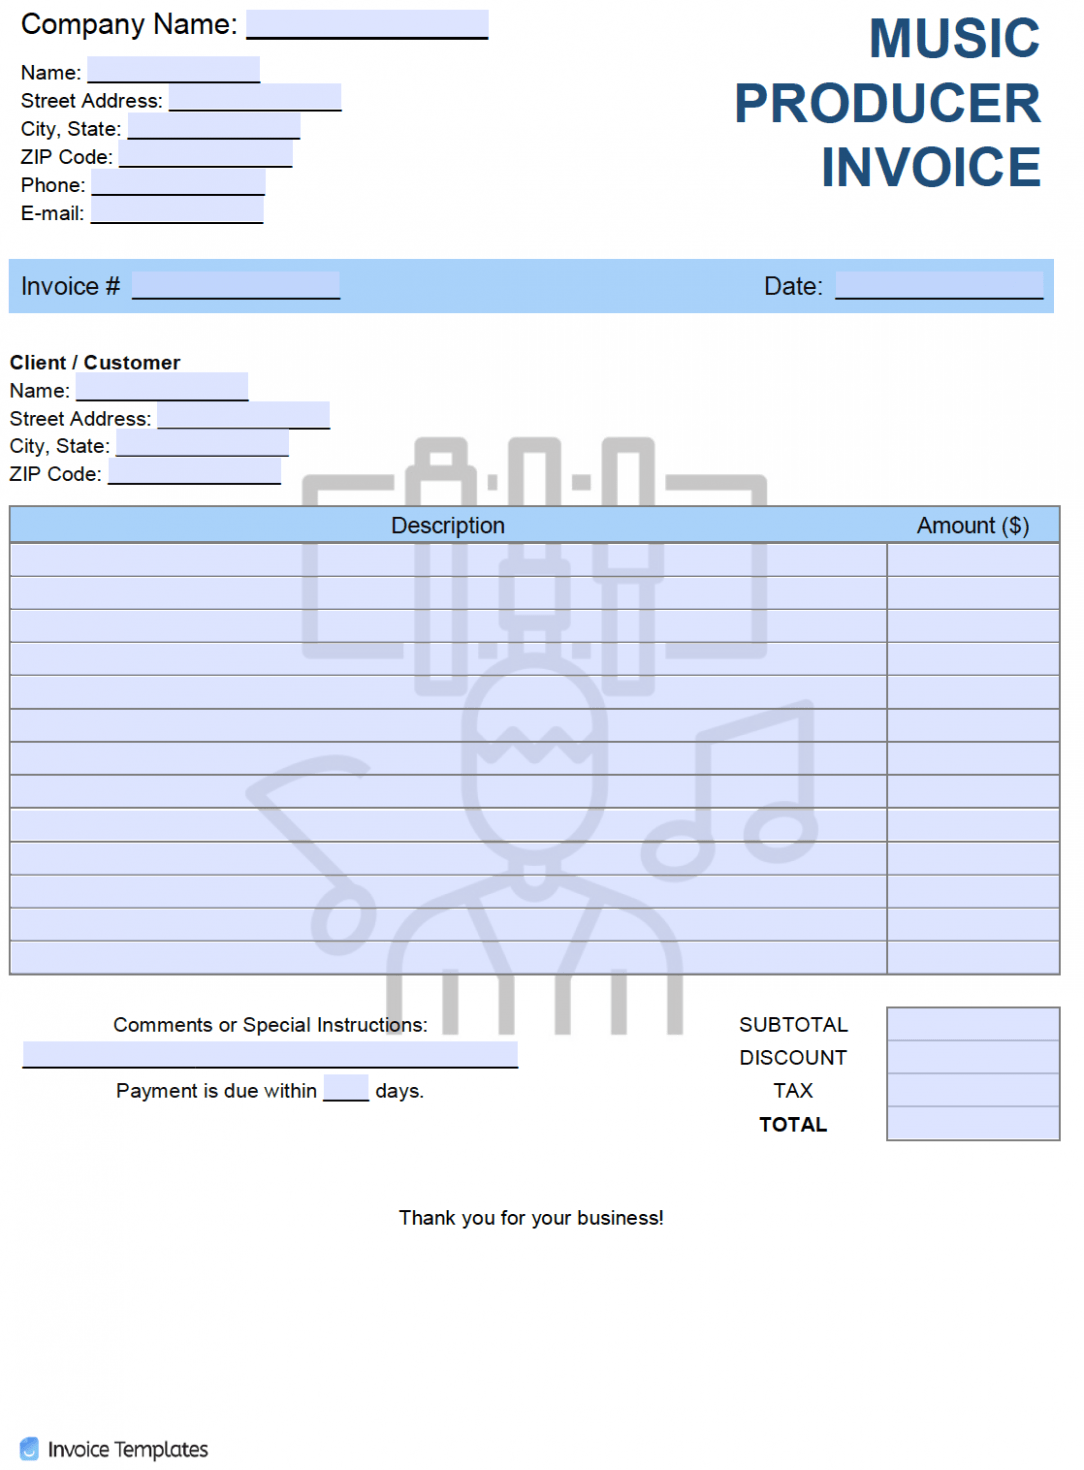 Editable Music Production Invoice Template Excel